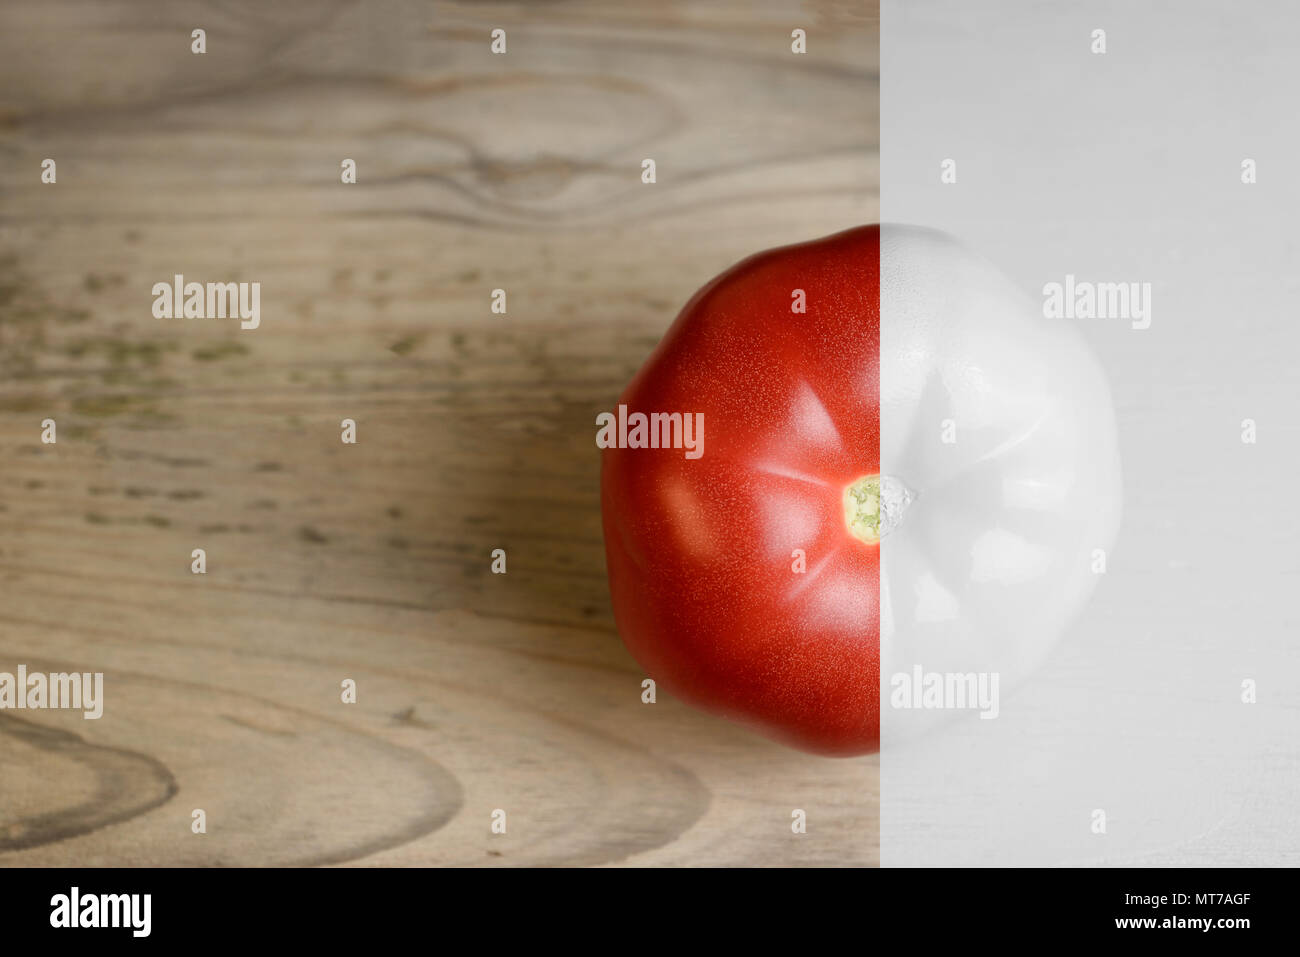 Creative layout made of tomato on wood backgruond. White paint and natural. Food concept. Stock Photo